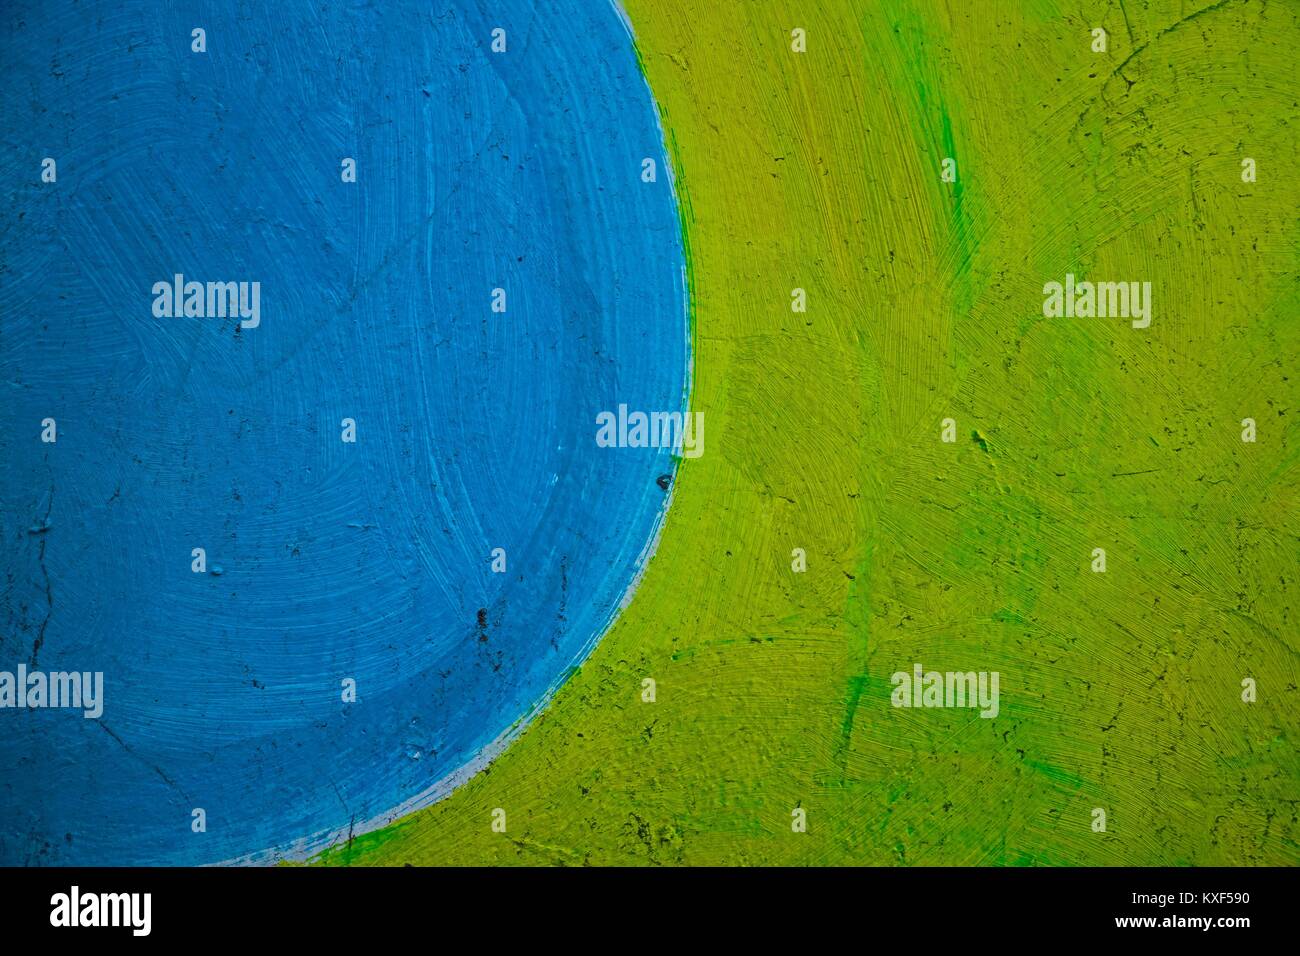 Lime green and blue painted wall background. Stock Photo